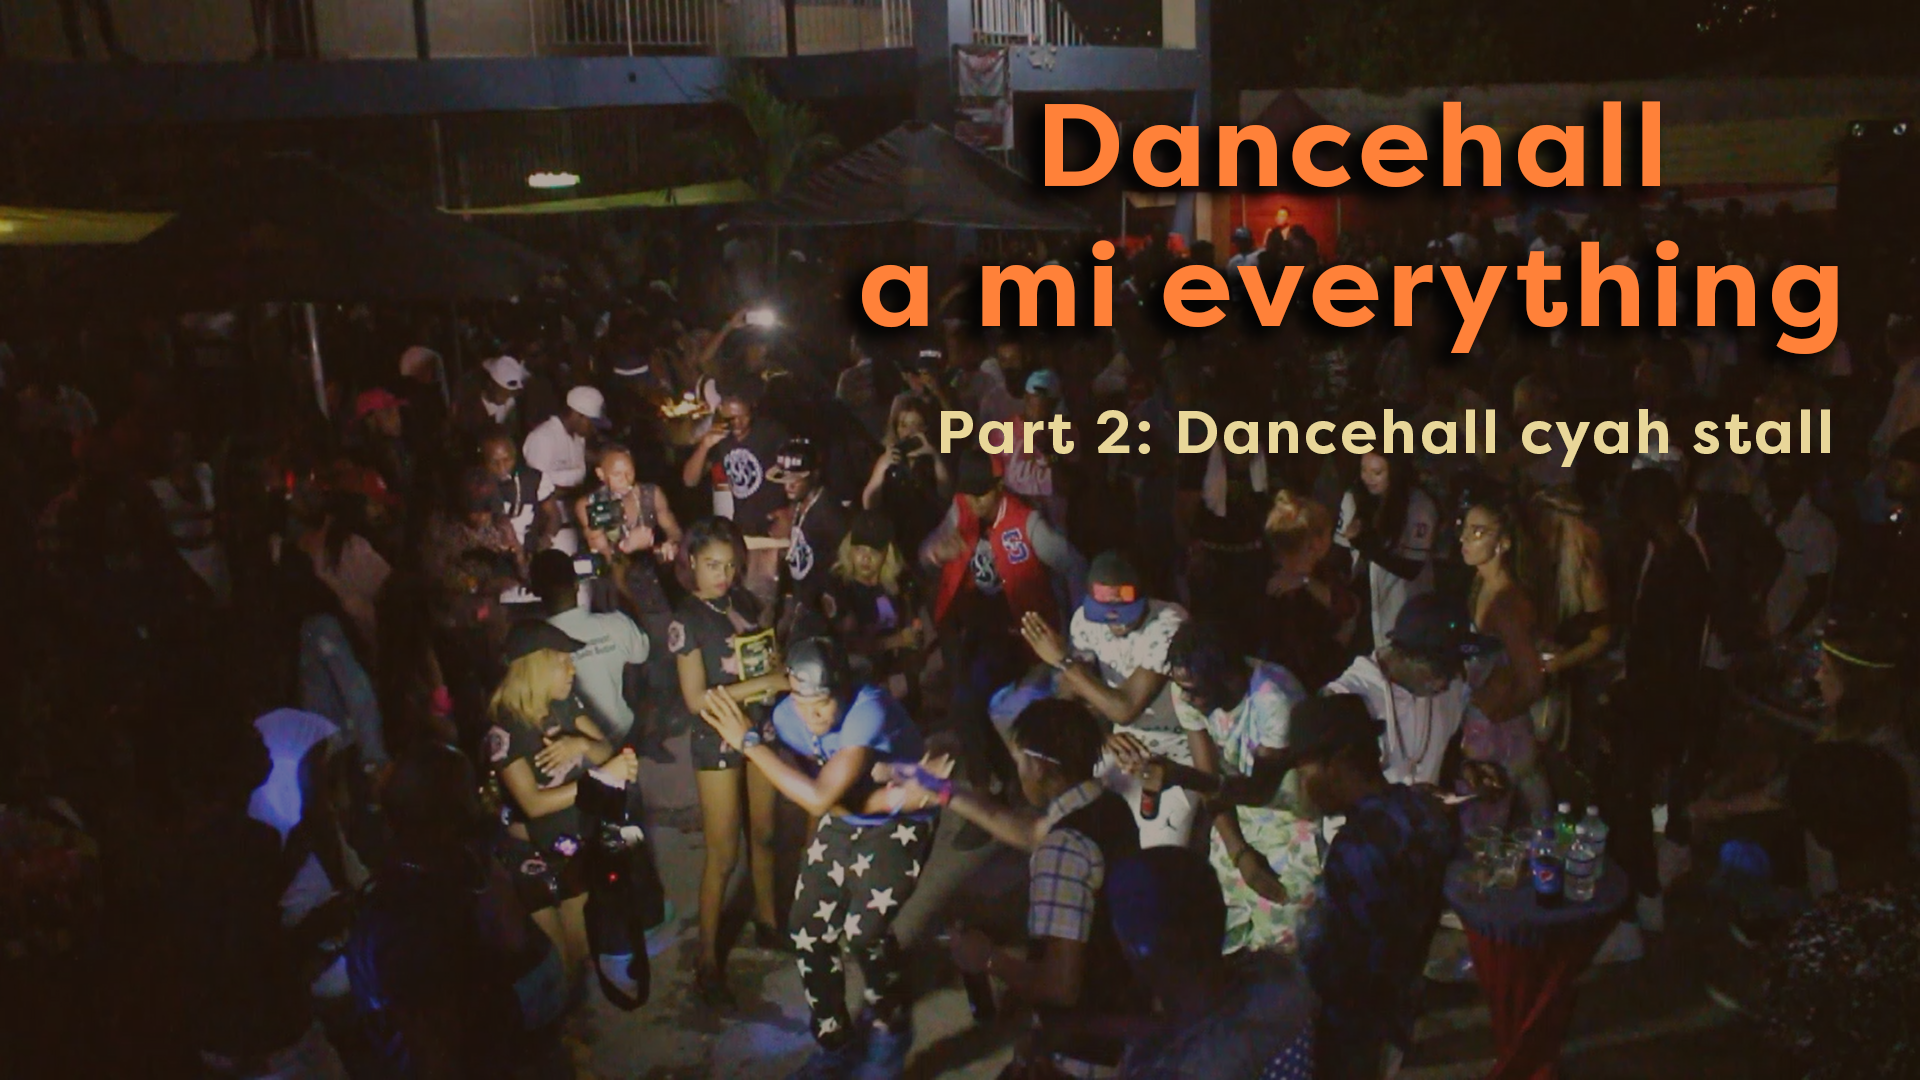 Part 2 is about slackness and bleaching as essential components of Dancehall.